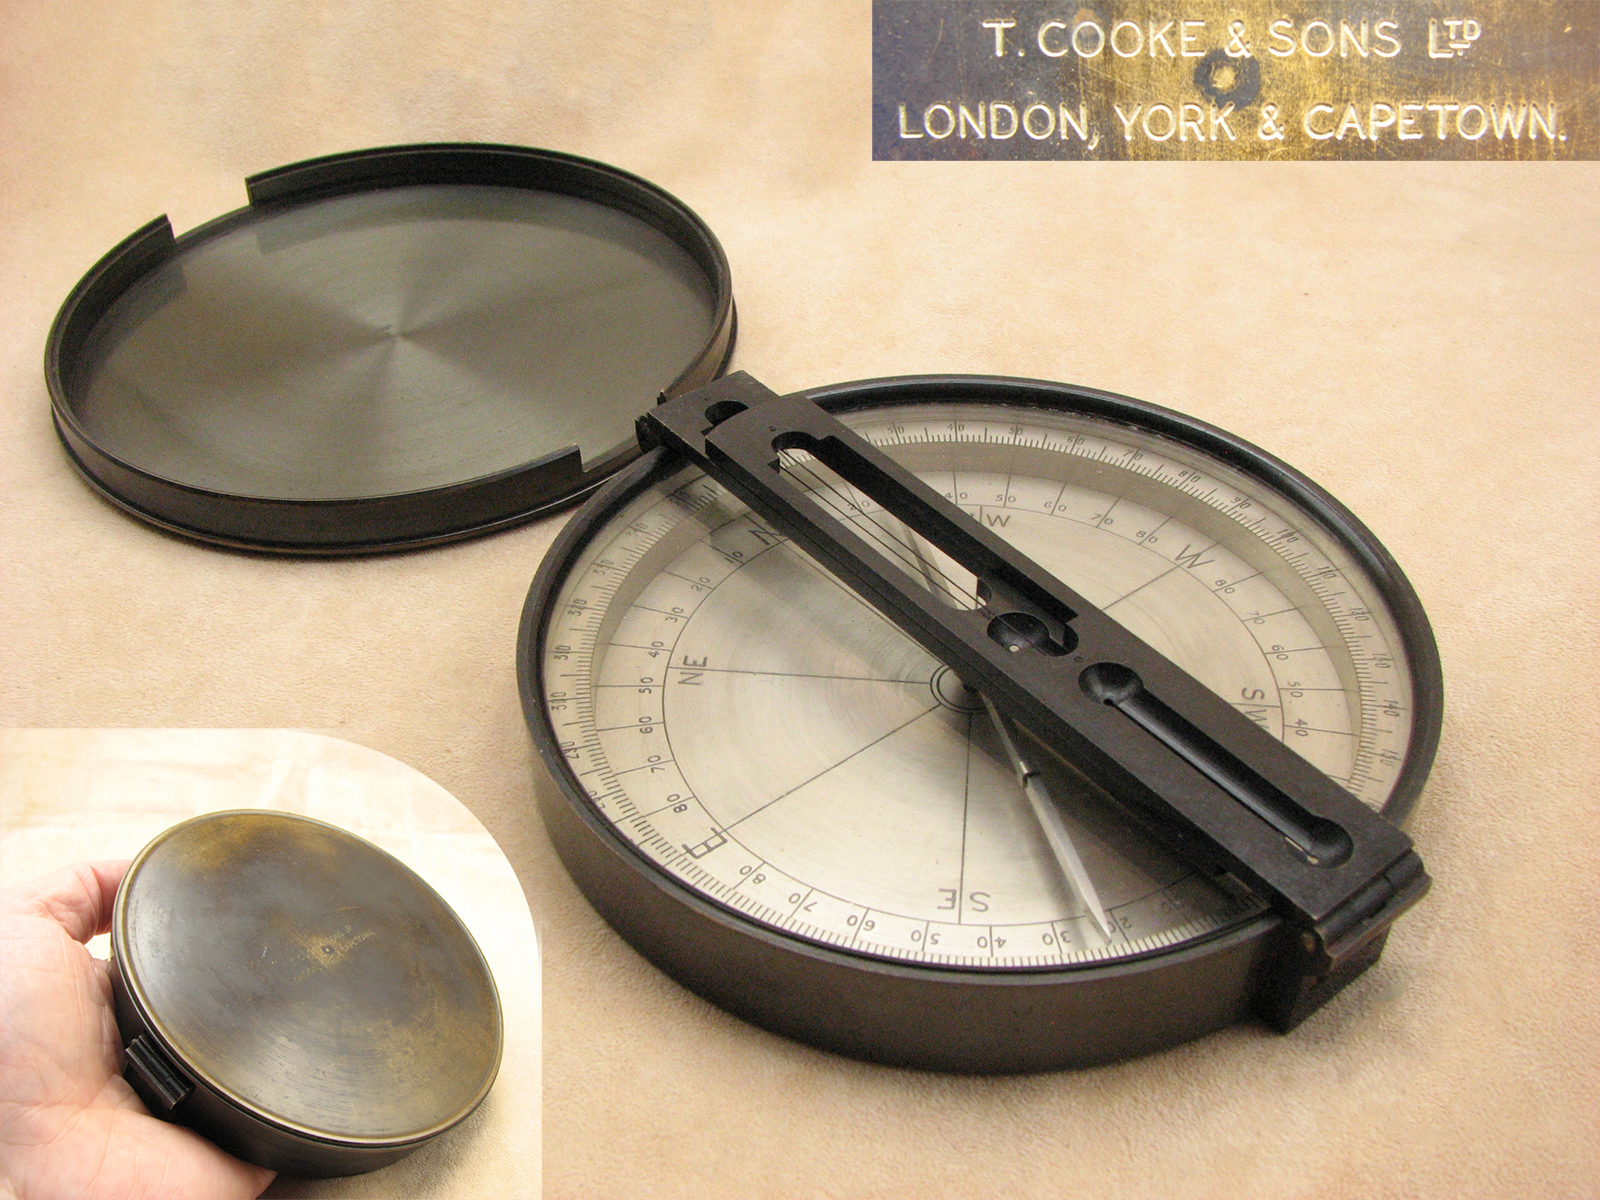 Late 19th century surveying compass by Thomas Cooke & Sons